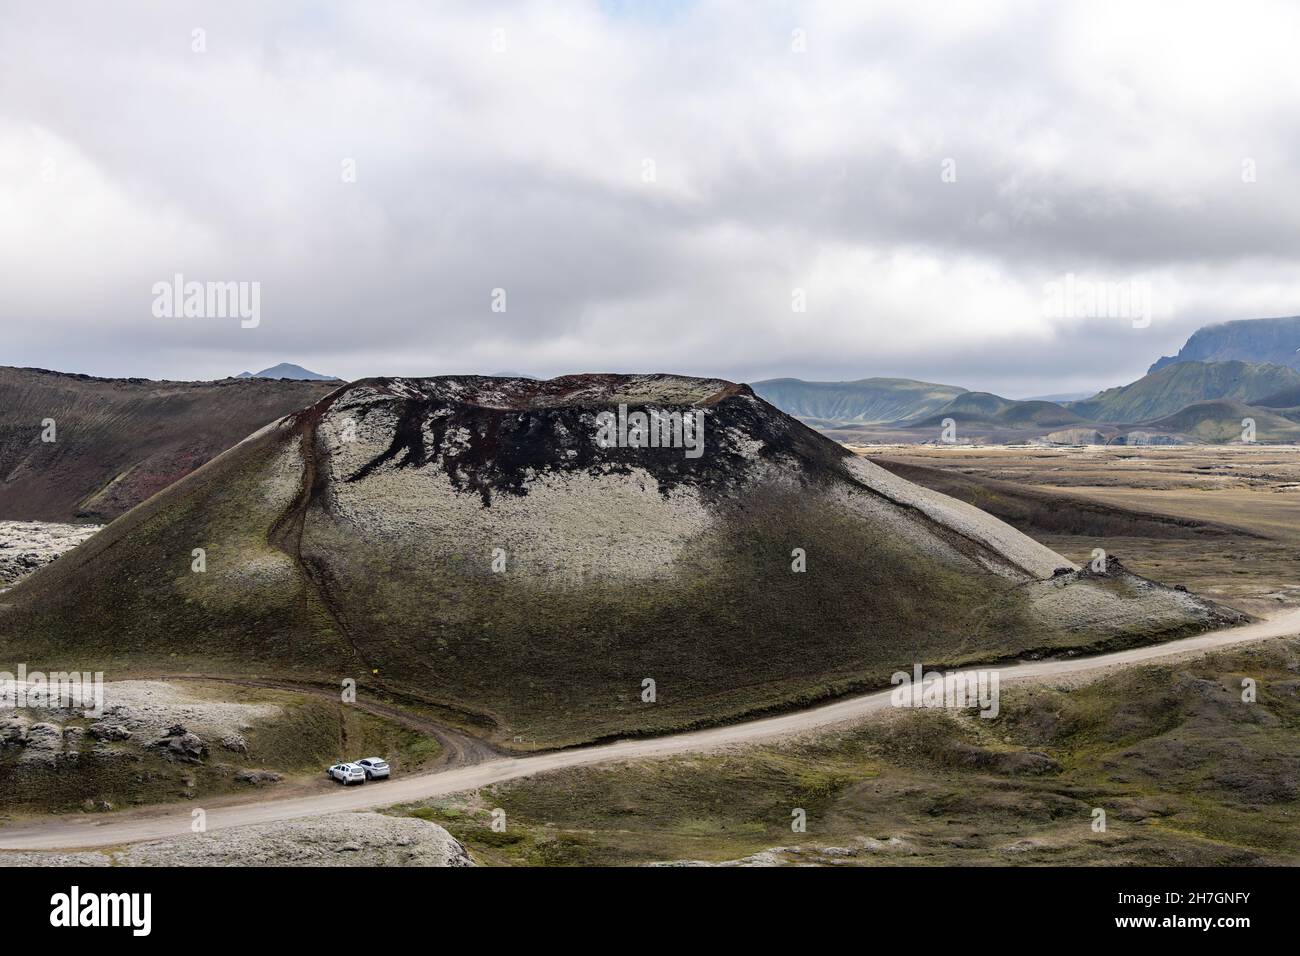 High angle view of a dormant volcano on the volcanic plateau nearby Katla volcano in Iceland with mountains in the background and cars parked Stock Photo